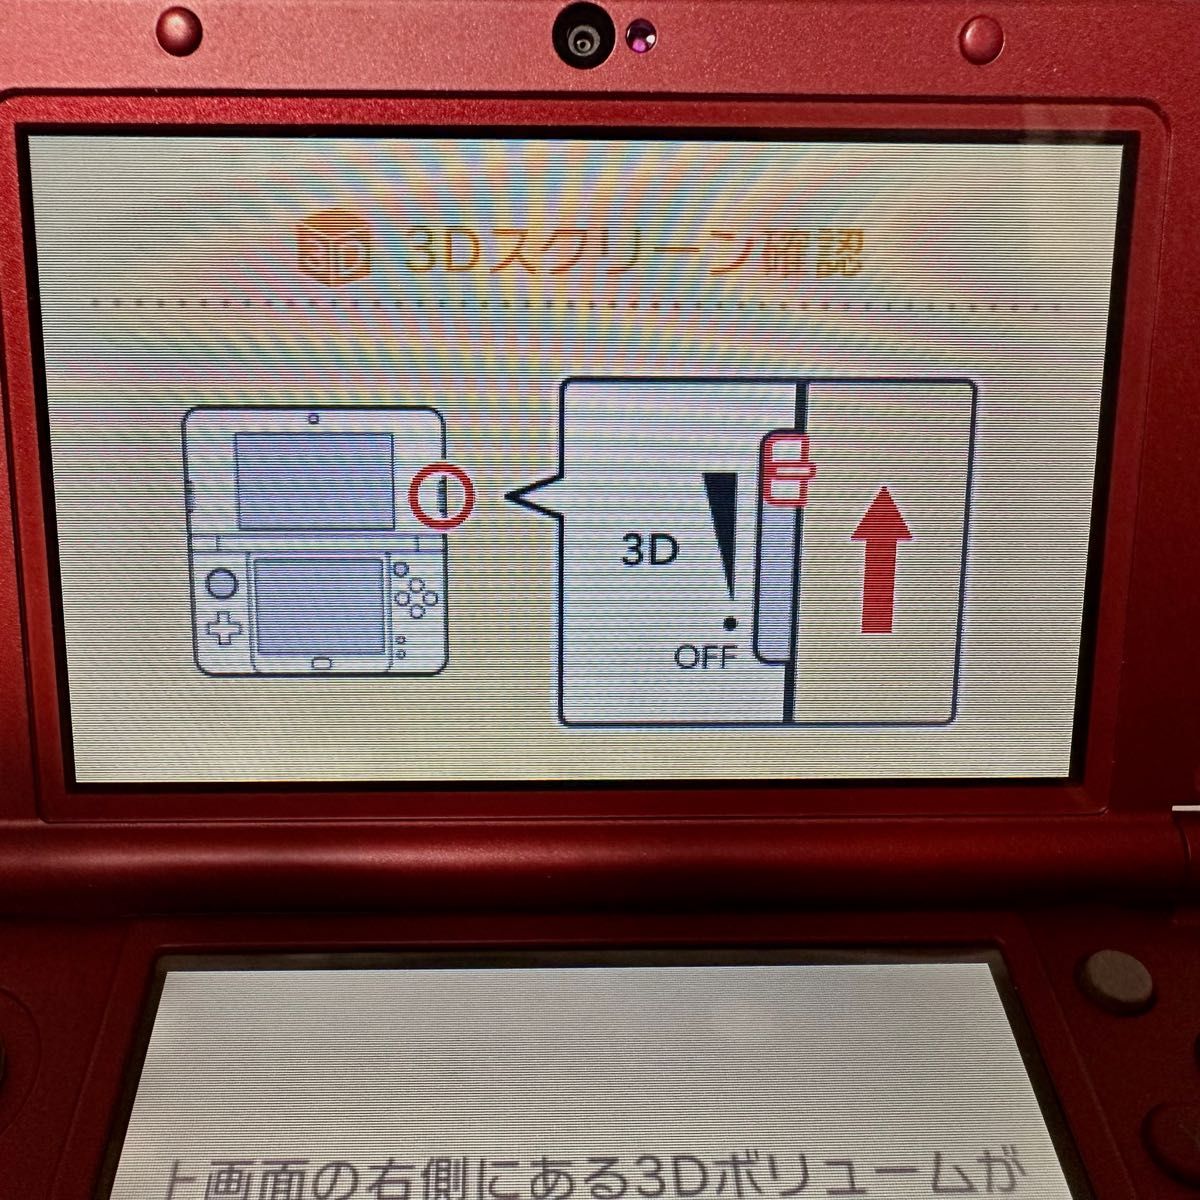 Nintendo new 3ds ll メタリックレッド 充電器付き｜PayPayフリマ